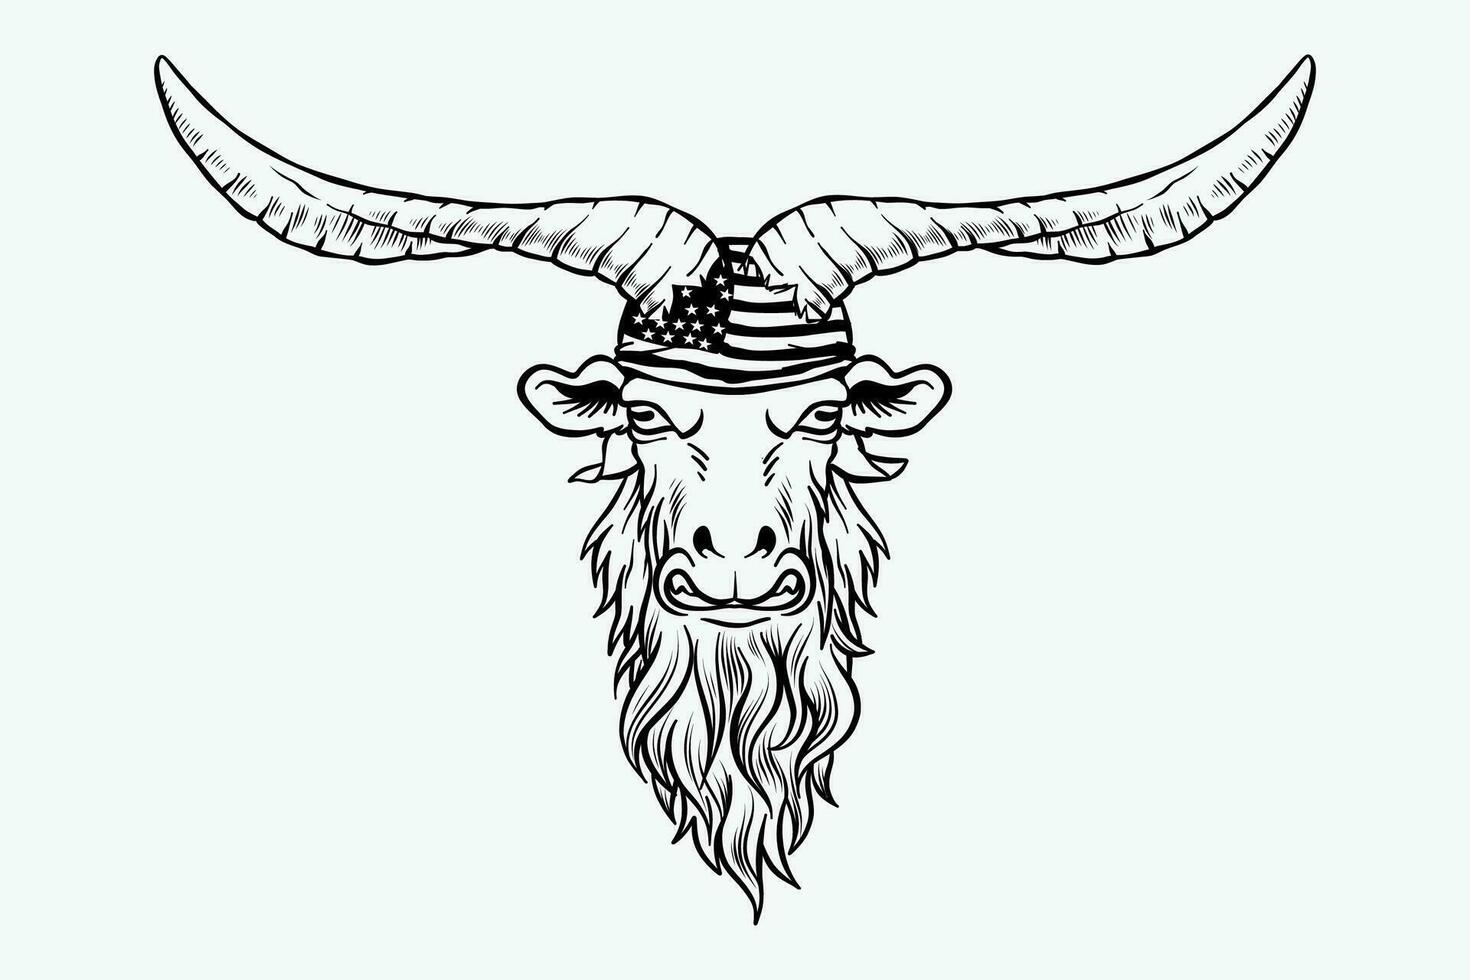 vector illustration of a black and white goat carrying a wrench